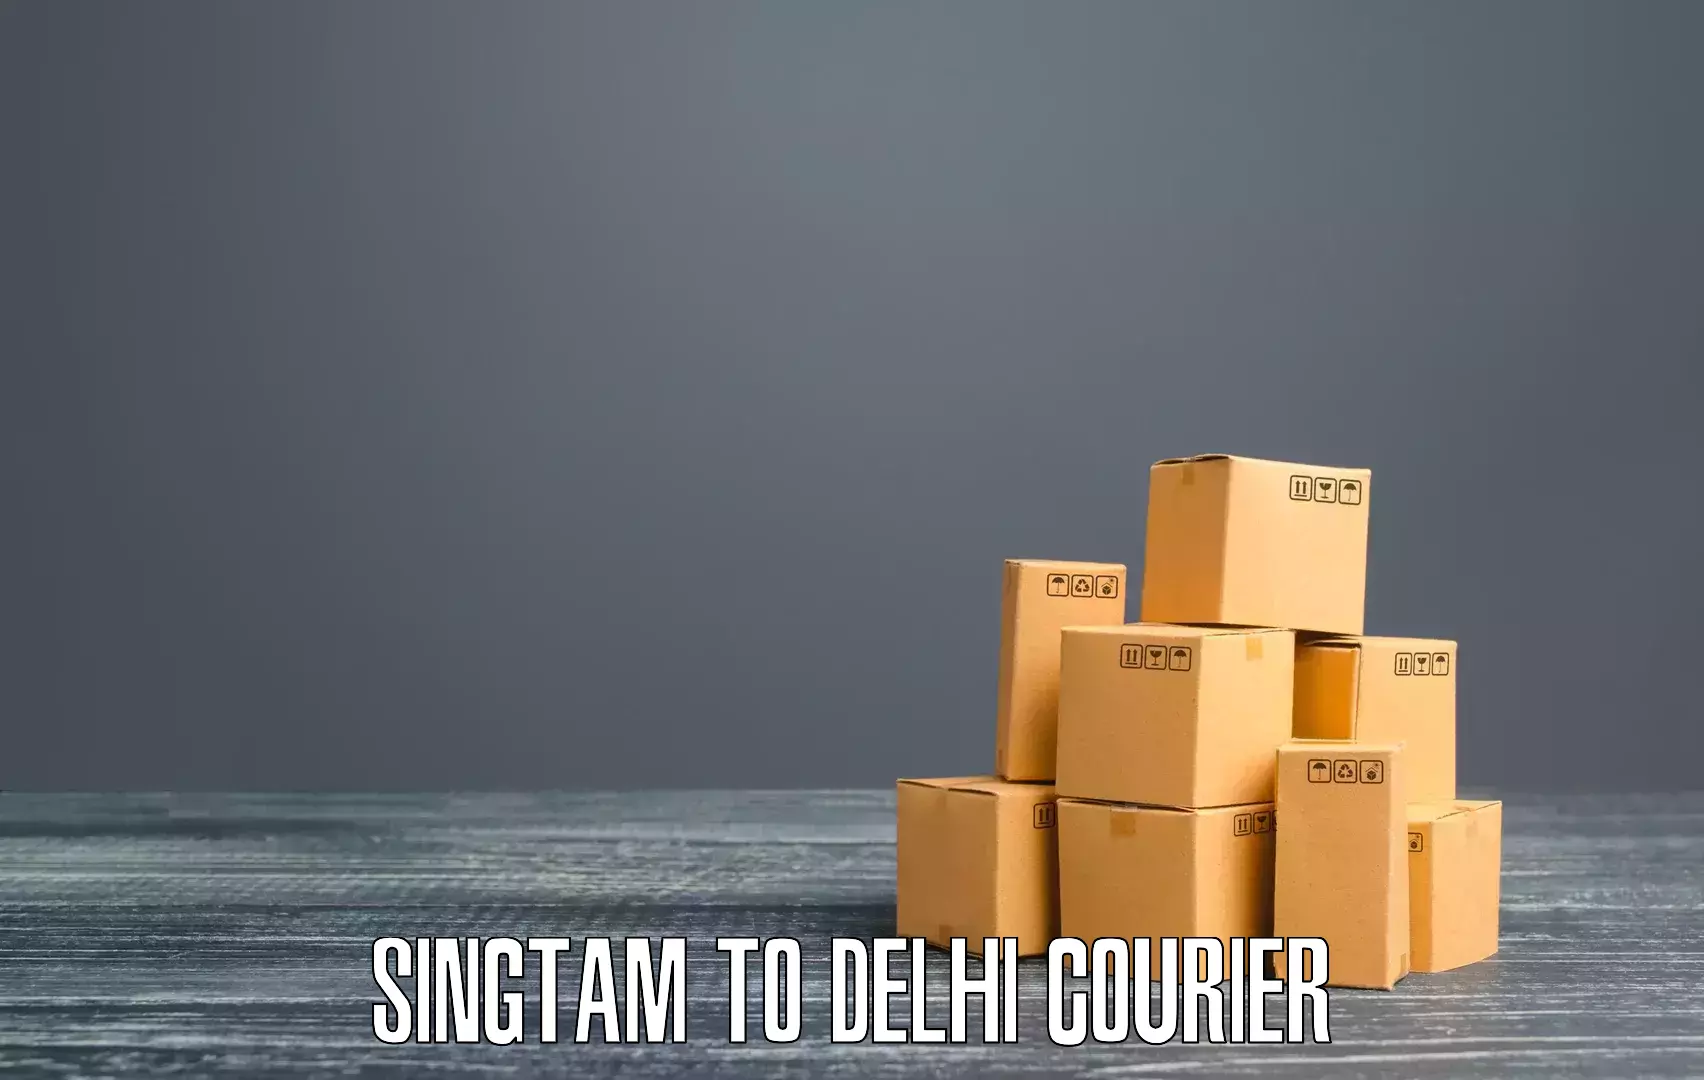 Sustainable delivery practices Singtam to East Delhi